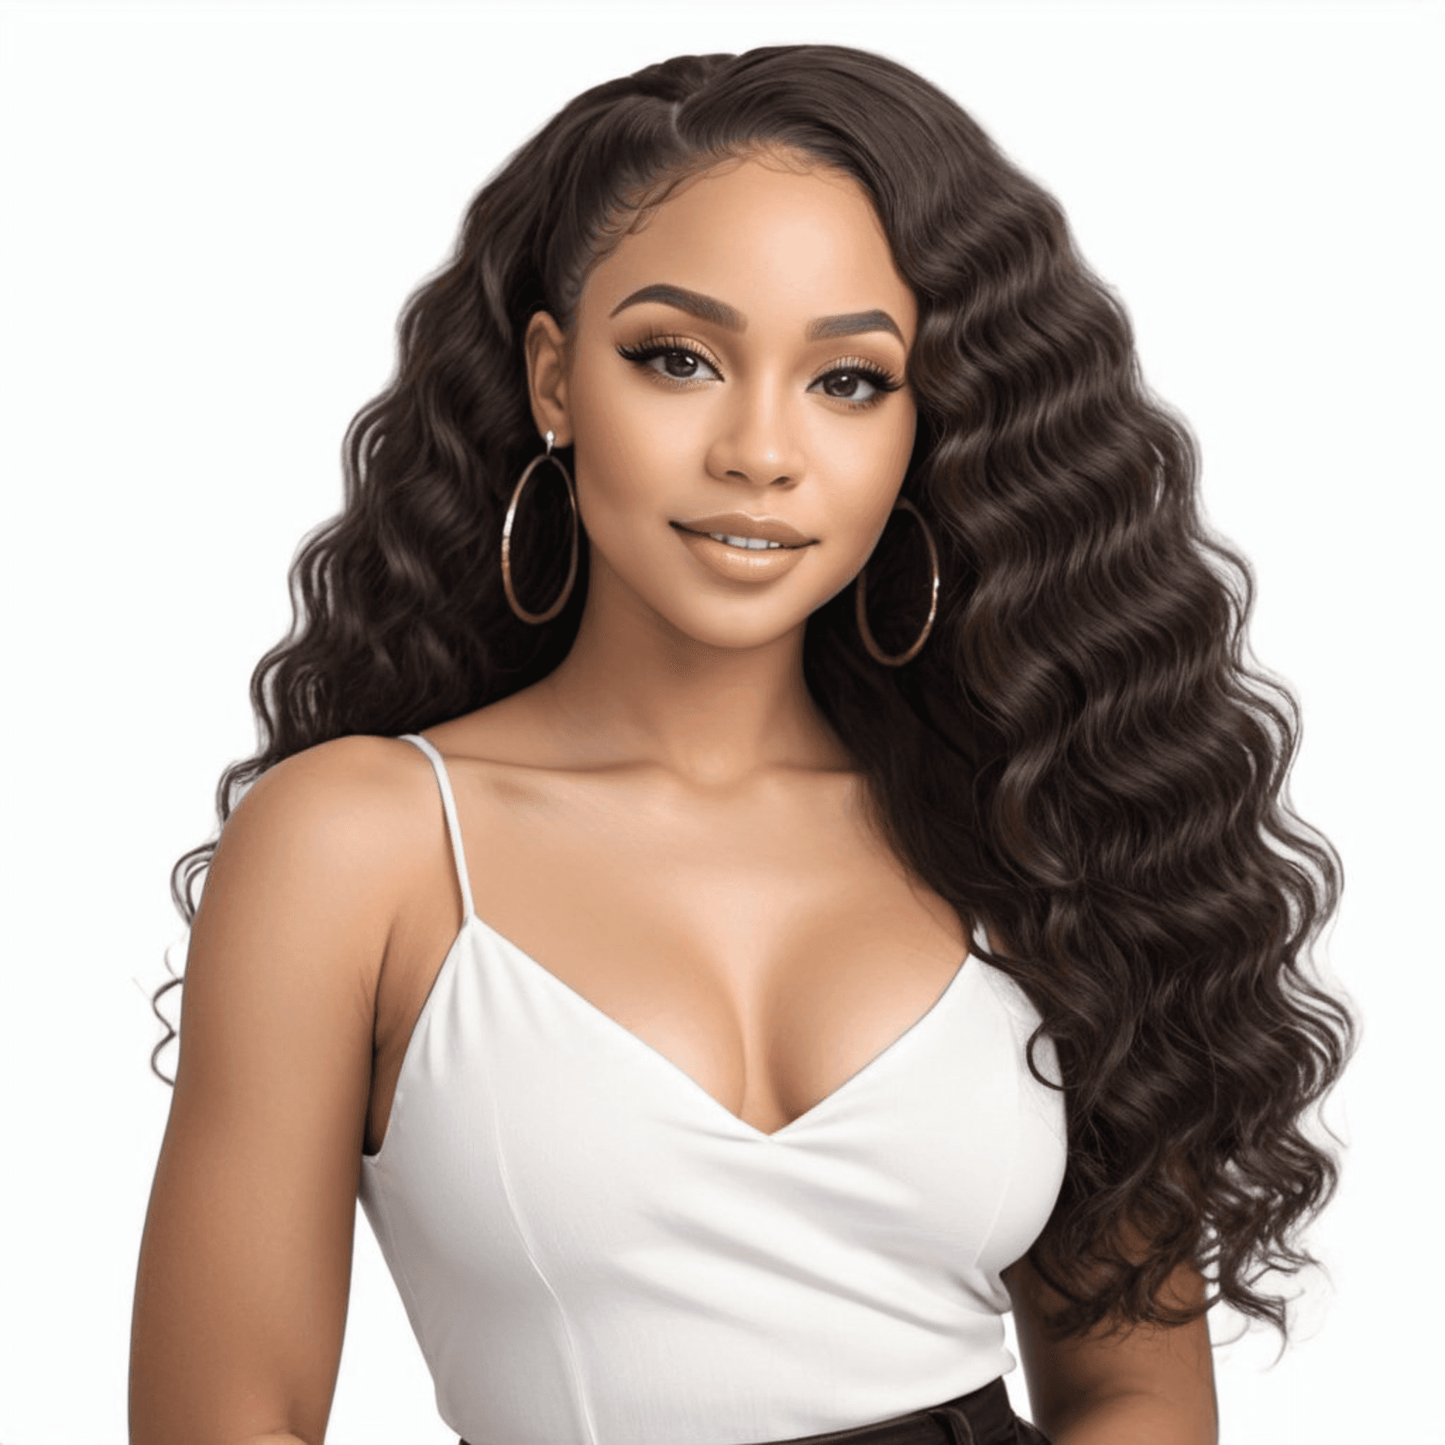 CAPD•HD Lace Wig Full Frontal 13X4 Deep Wave - CAPD INSPIRED HAIR INC.